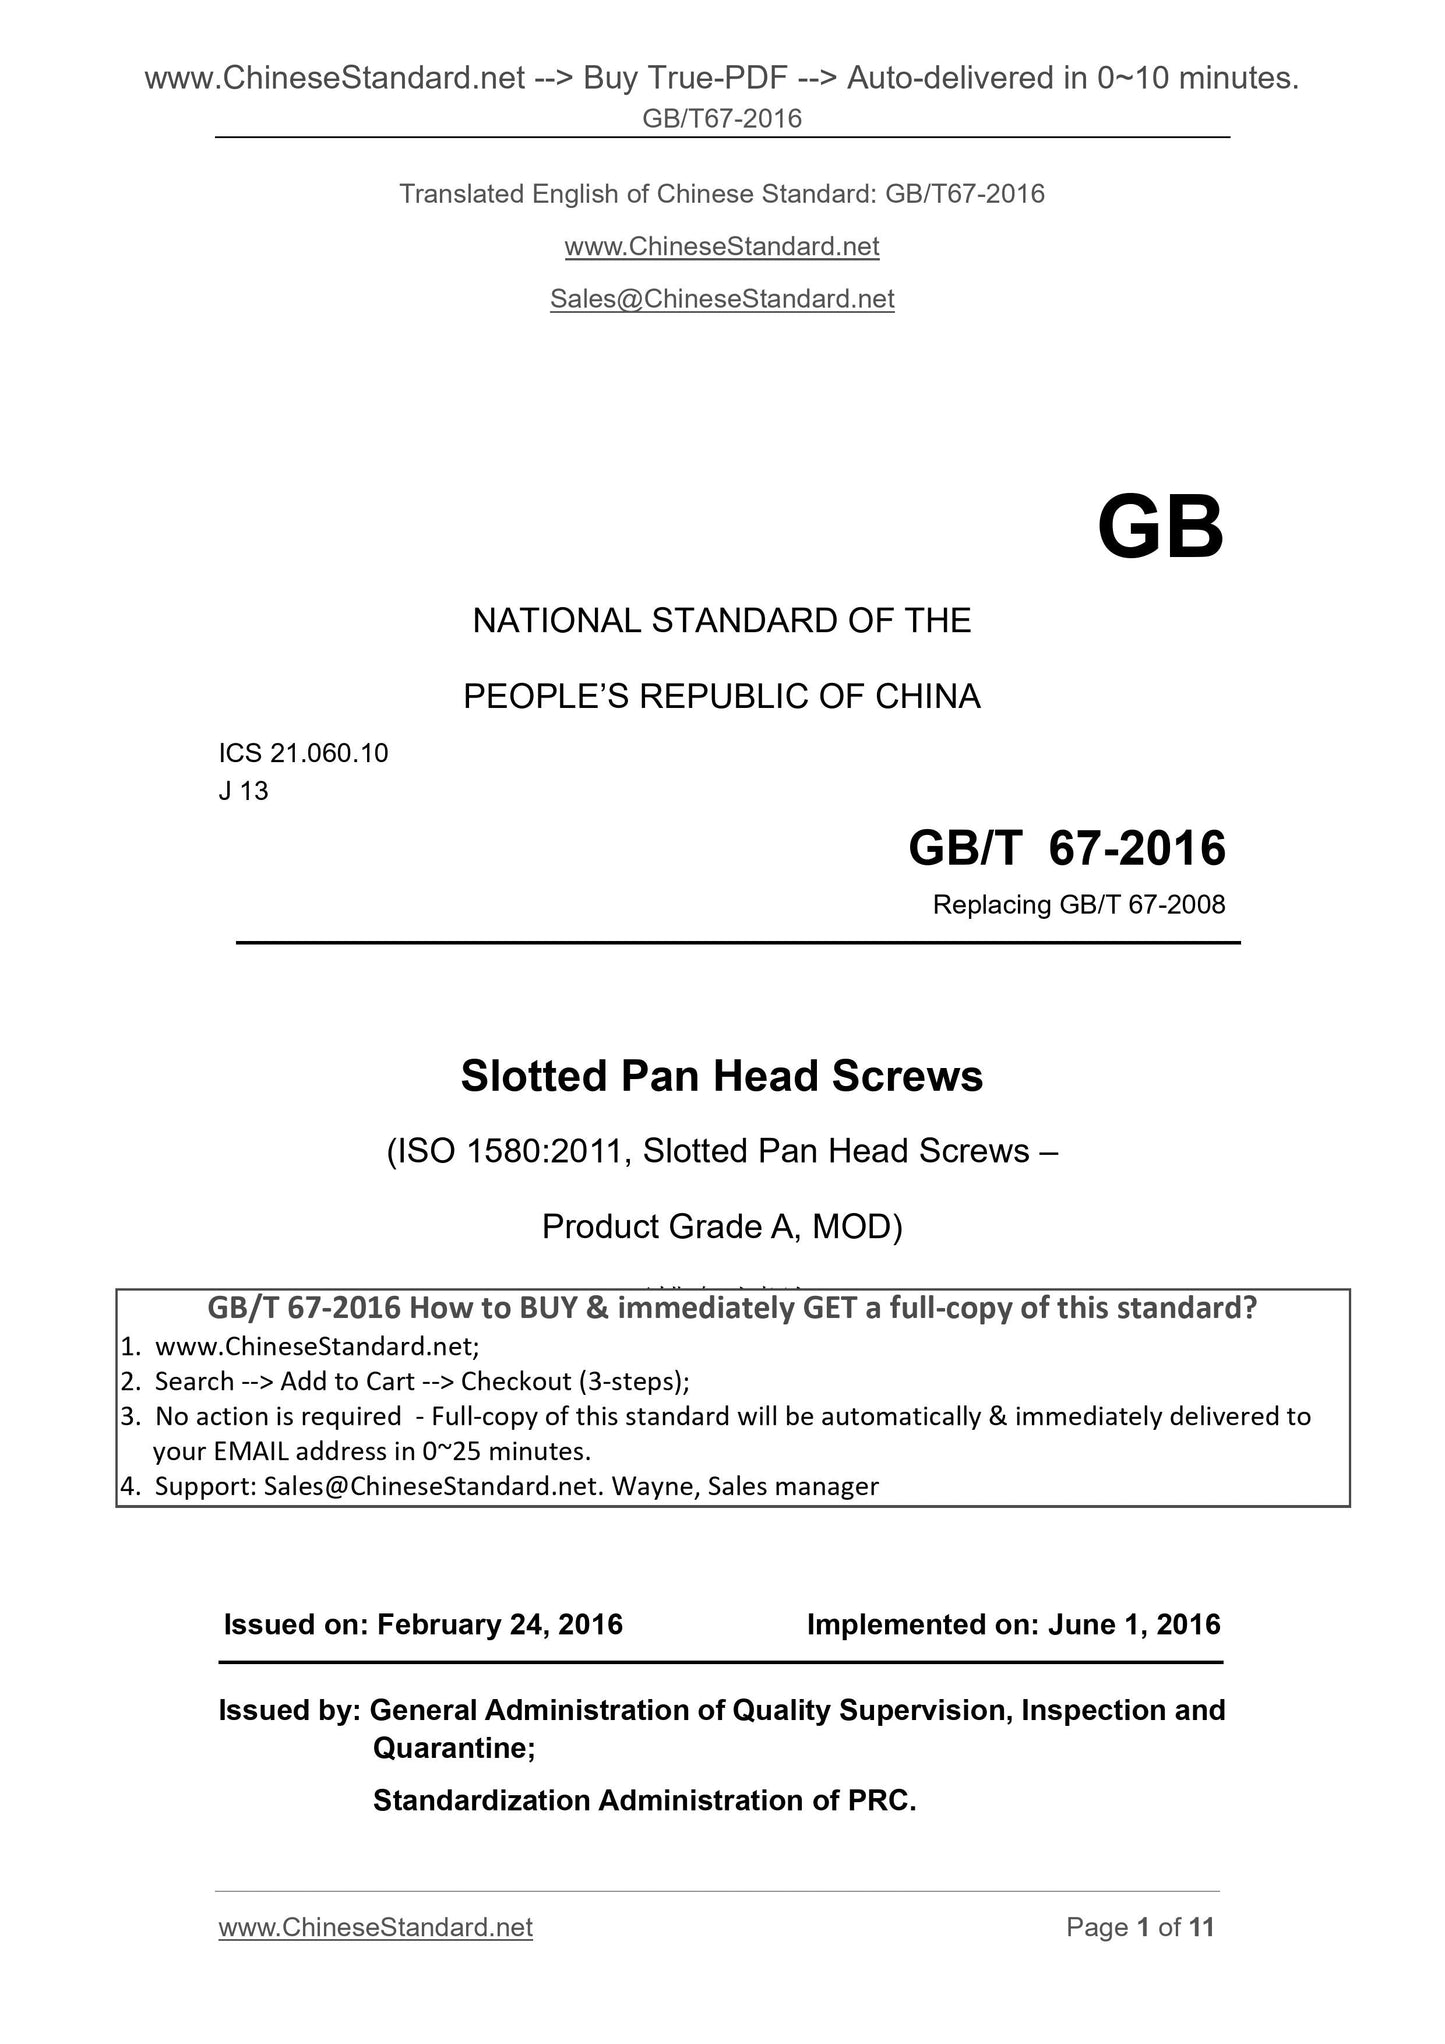 GB/T 67-2016 Page 1